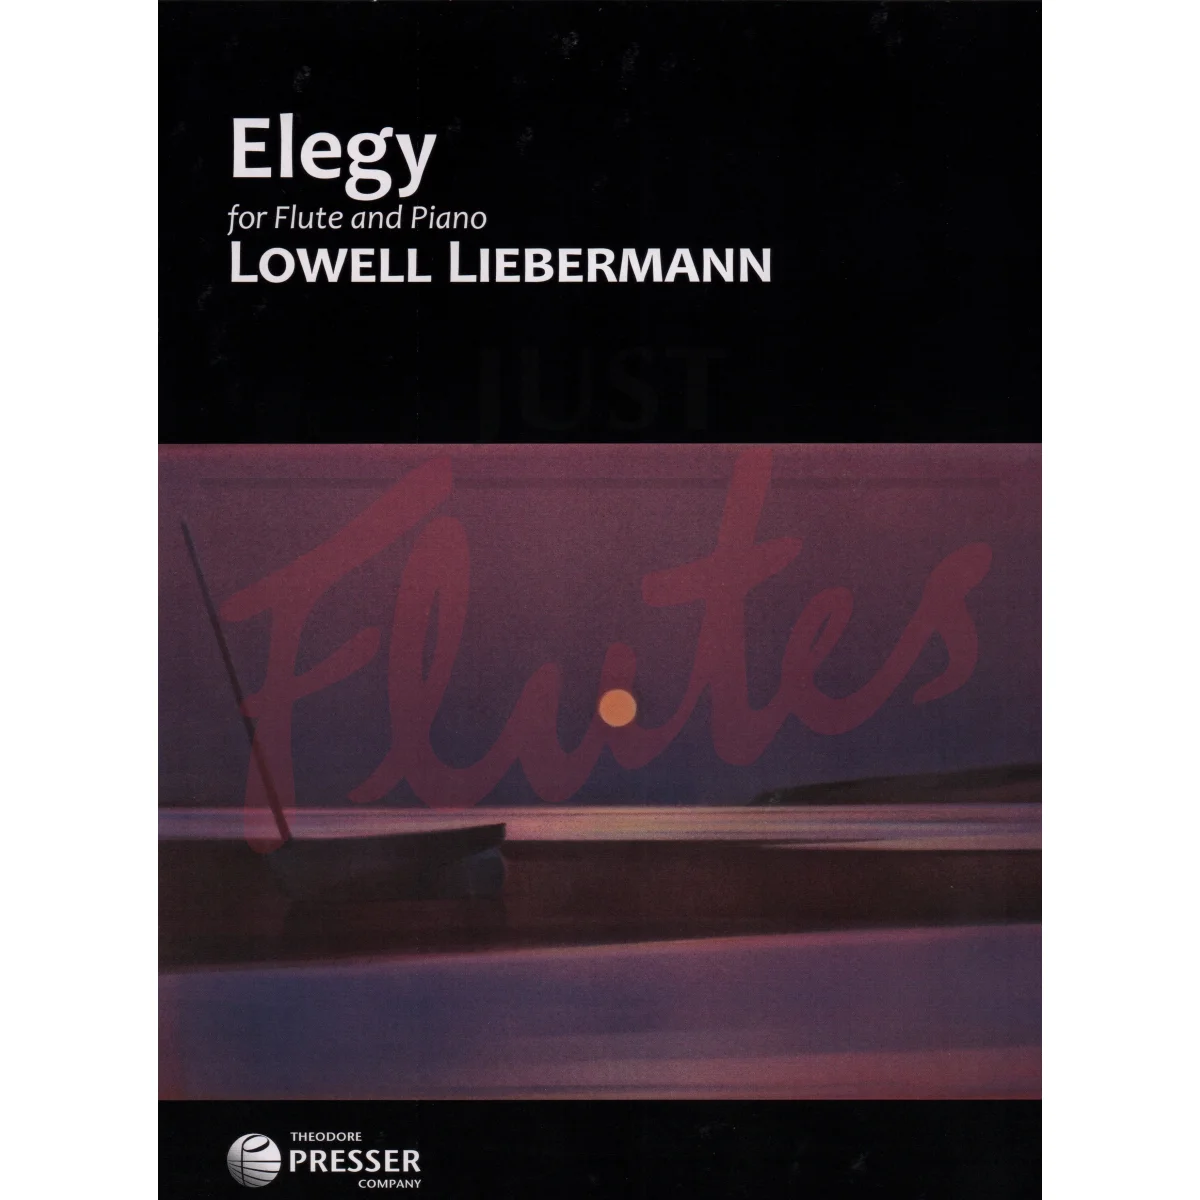 Elegy for Flute and Piano